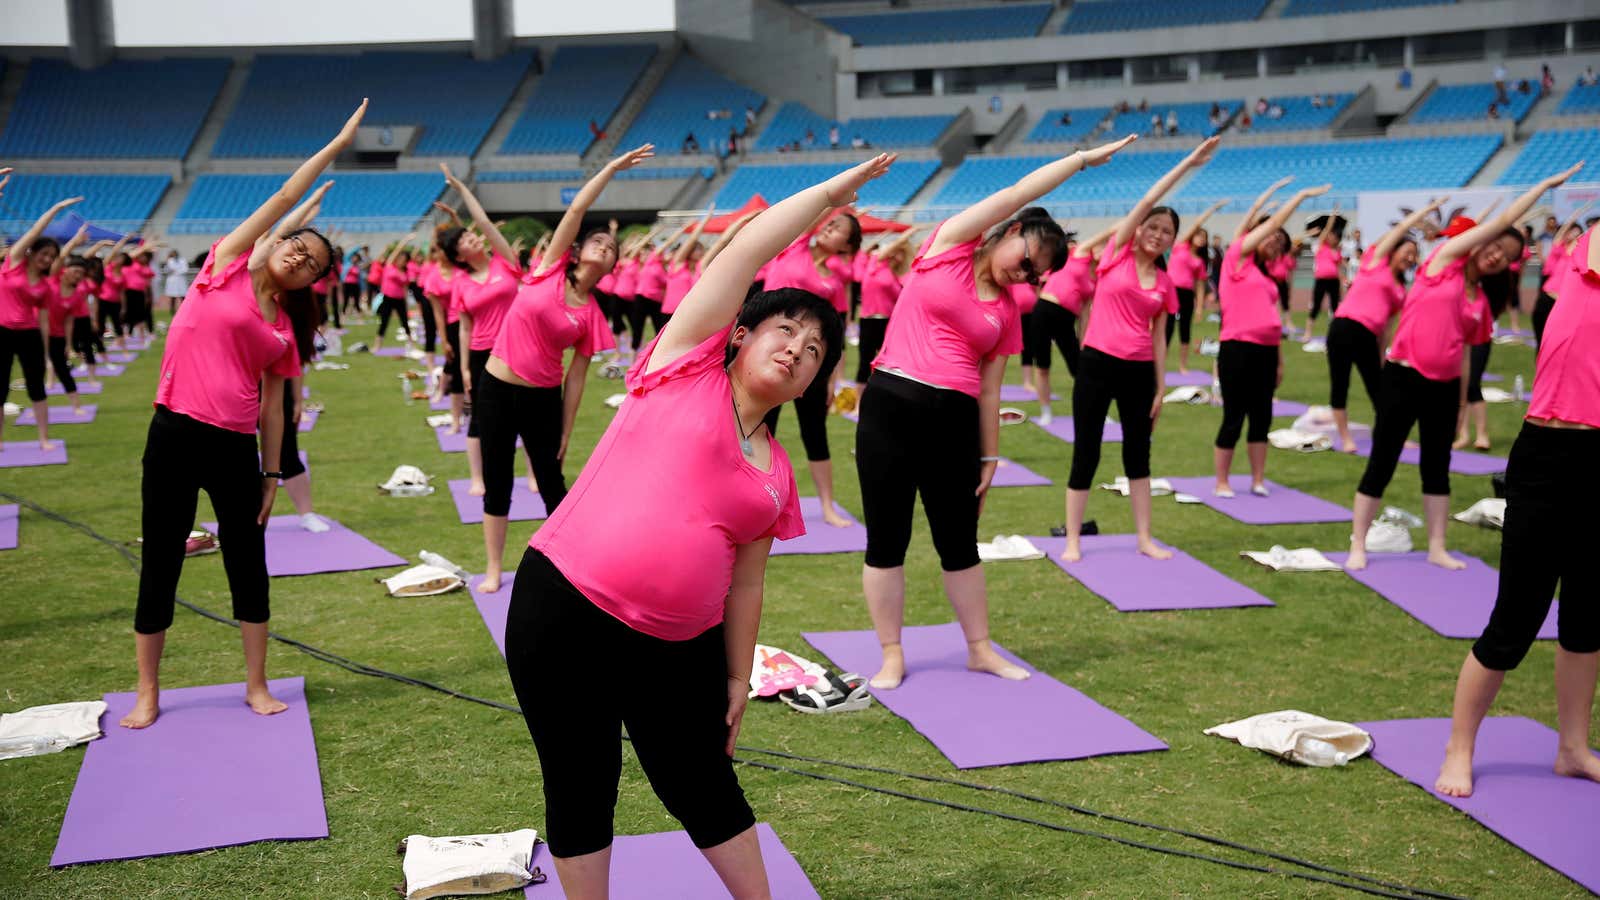 Over nine hundred pregnant women practice Yoga together in China.